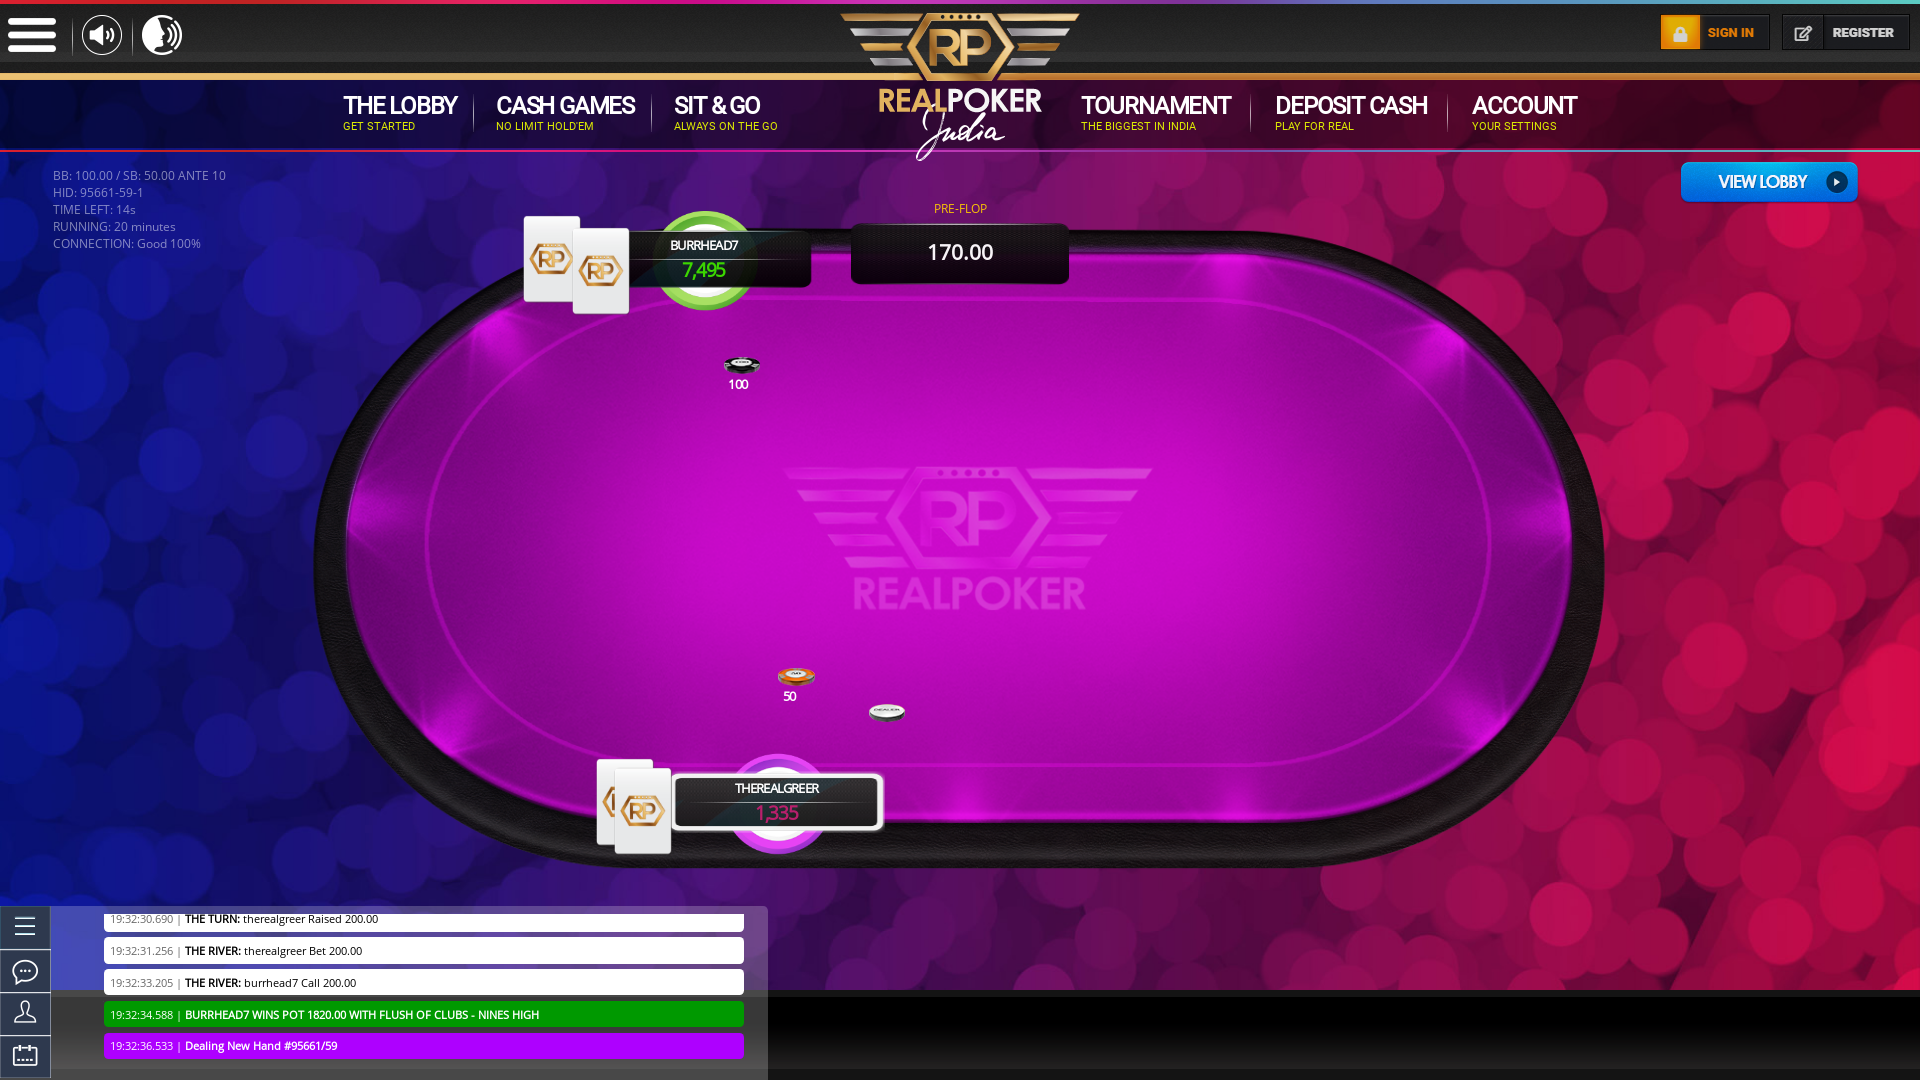 Real poker 6 player table in the 19th minute of the match